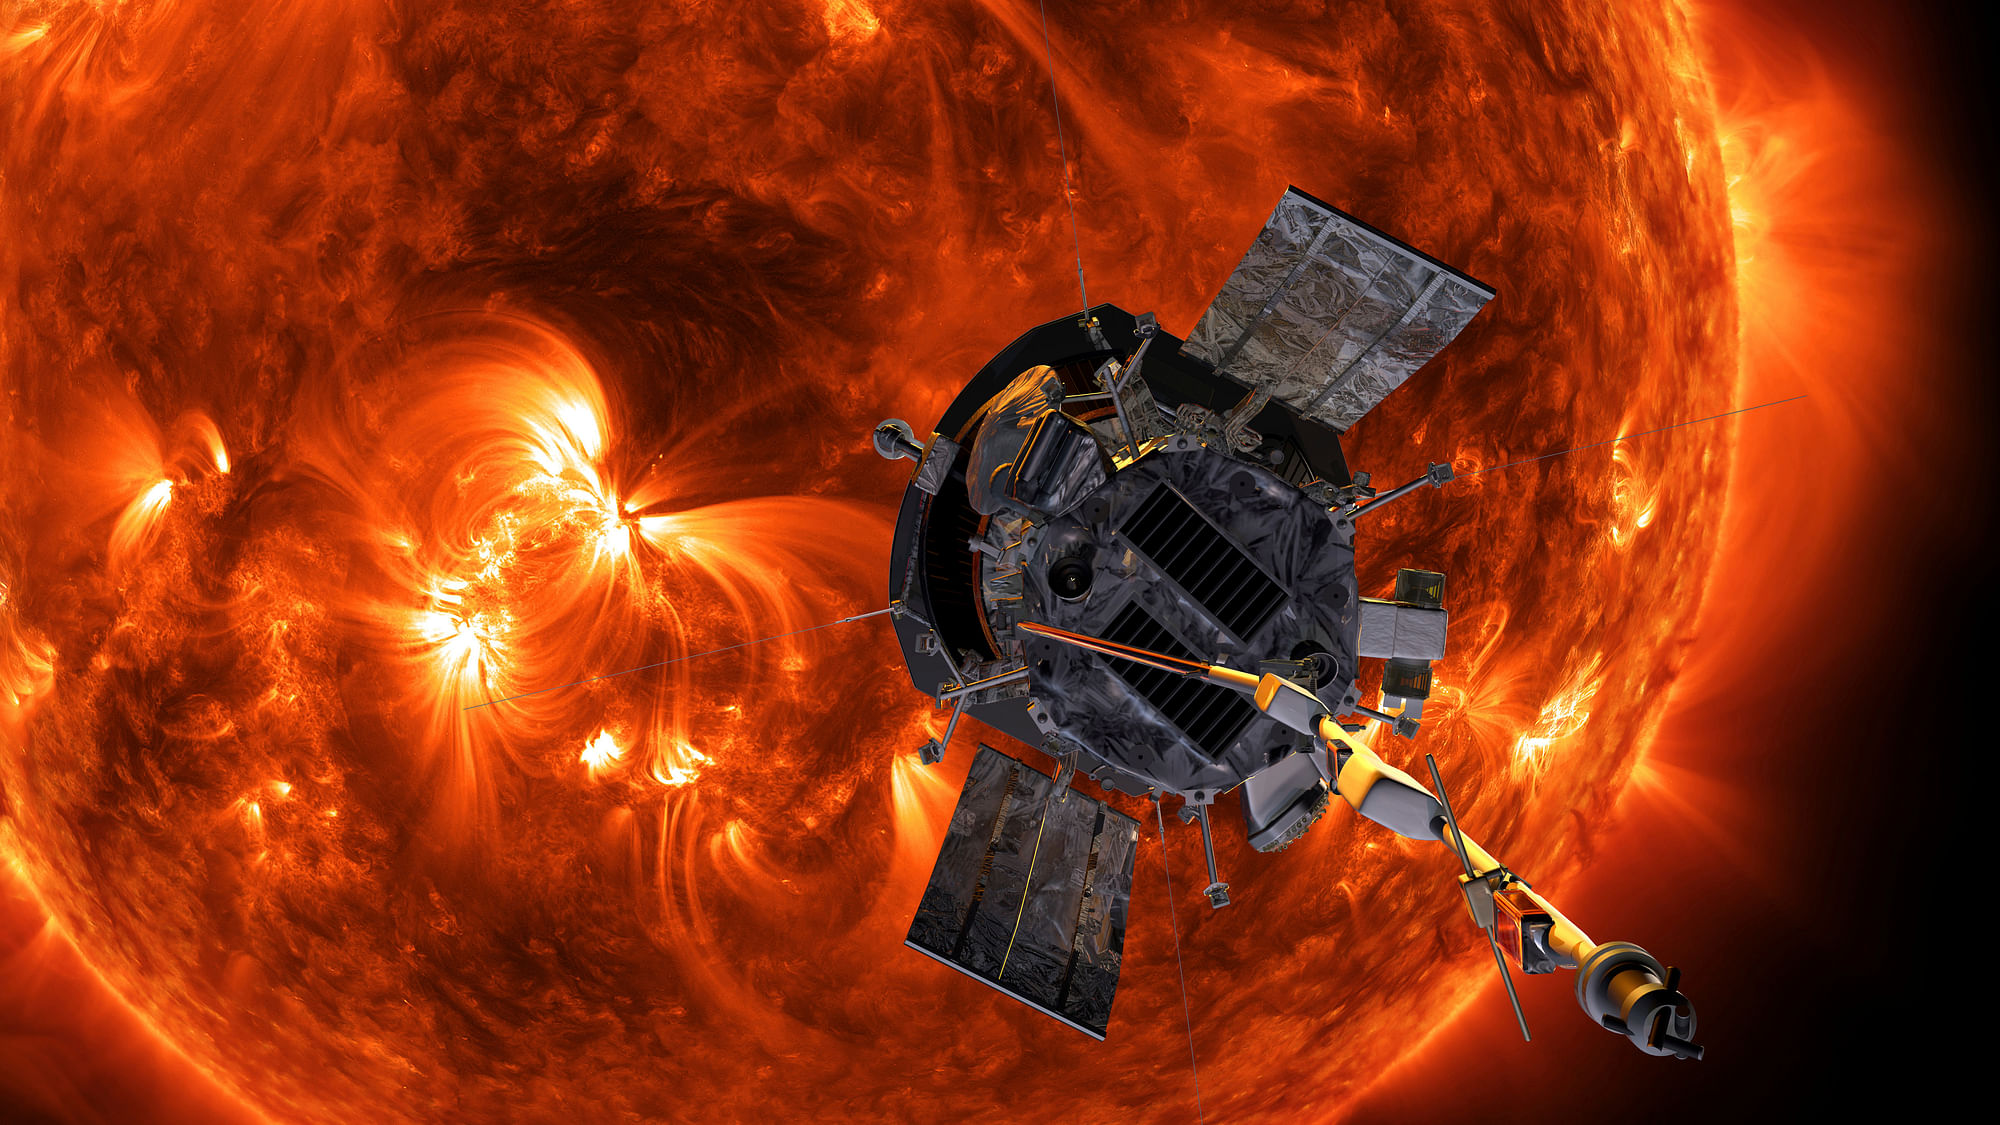 This image, made available by NASA, shows an artist’s rendering of the Parker Solar Probe approaching the Sun. It’s designed to take solar punishment like never before, thanks to its revolutionary heat shield